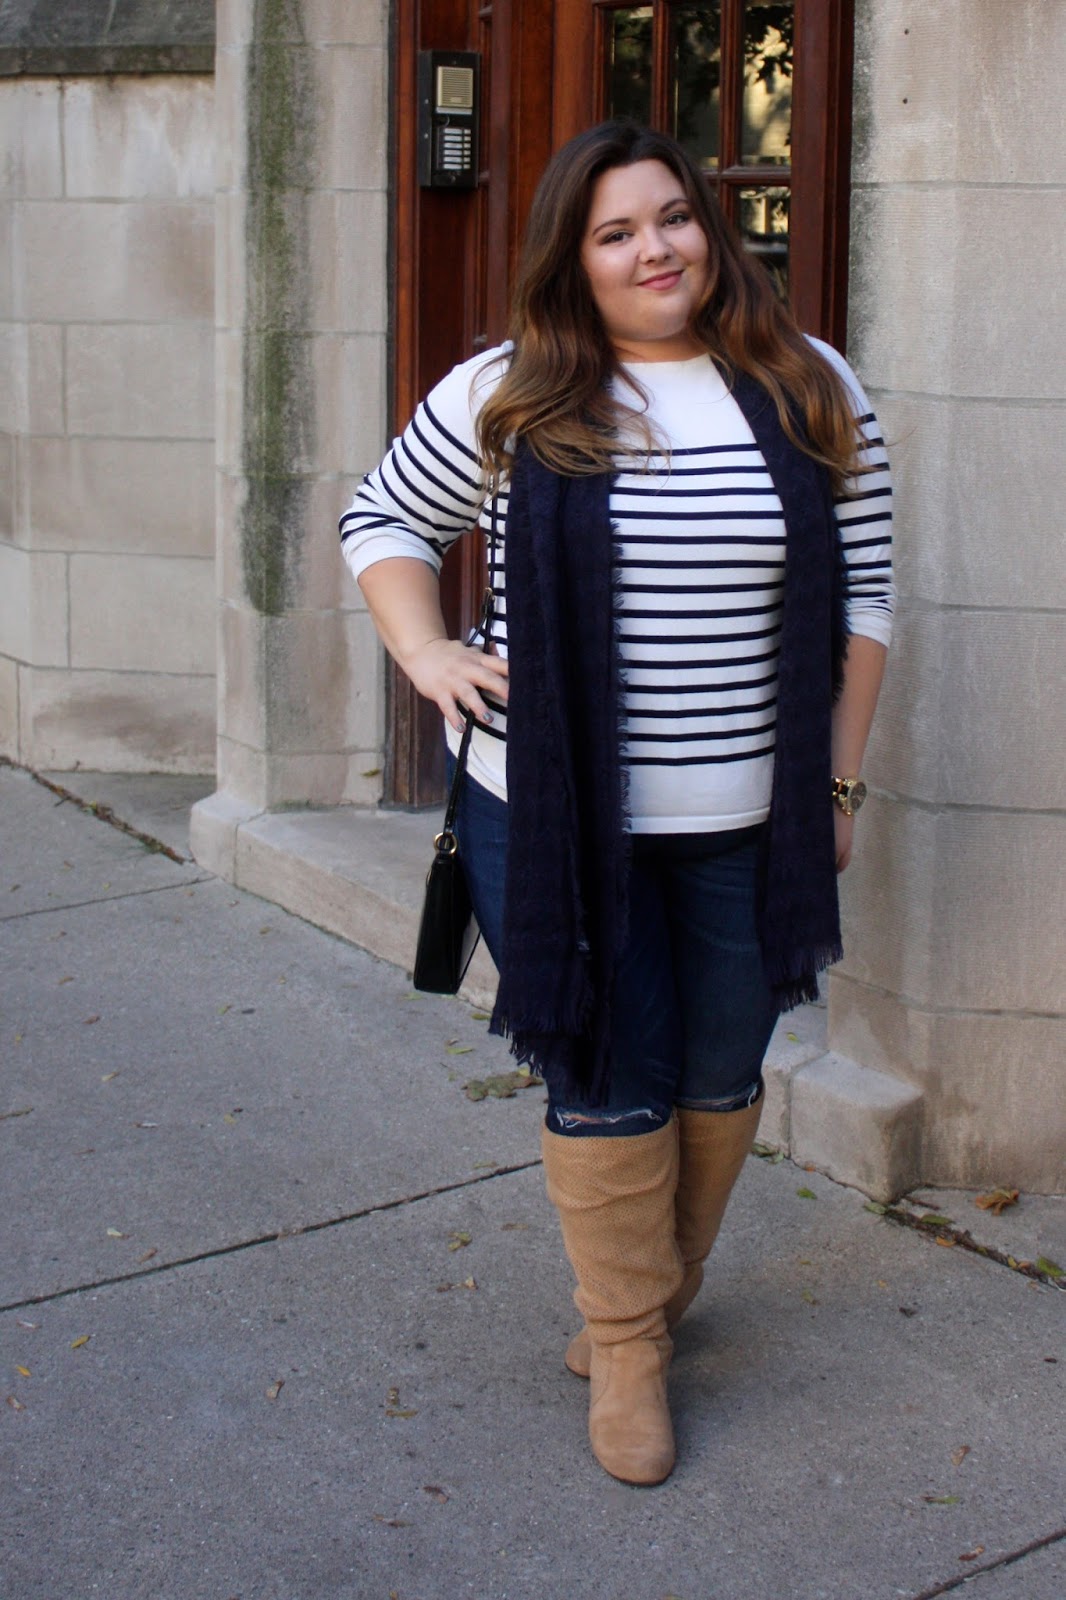 how to cut holes in jeans, cut holes in the knees, CAN CURVY GIRLS WEAR HORIZONTAL STRIPES, plus size, horizontal stripes, how to wear stripes, plus size fashion blogger, fashion blogger, natalie craig, natalie in the city, chicago, wide calf boots, striped sweaters, fall fashion, how to wear a scarf